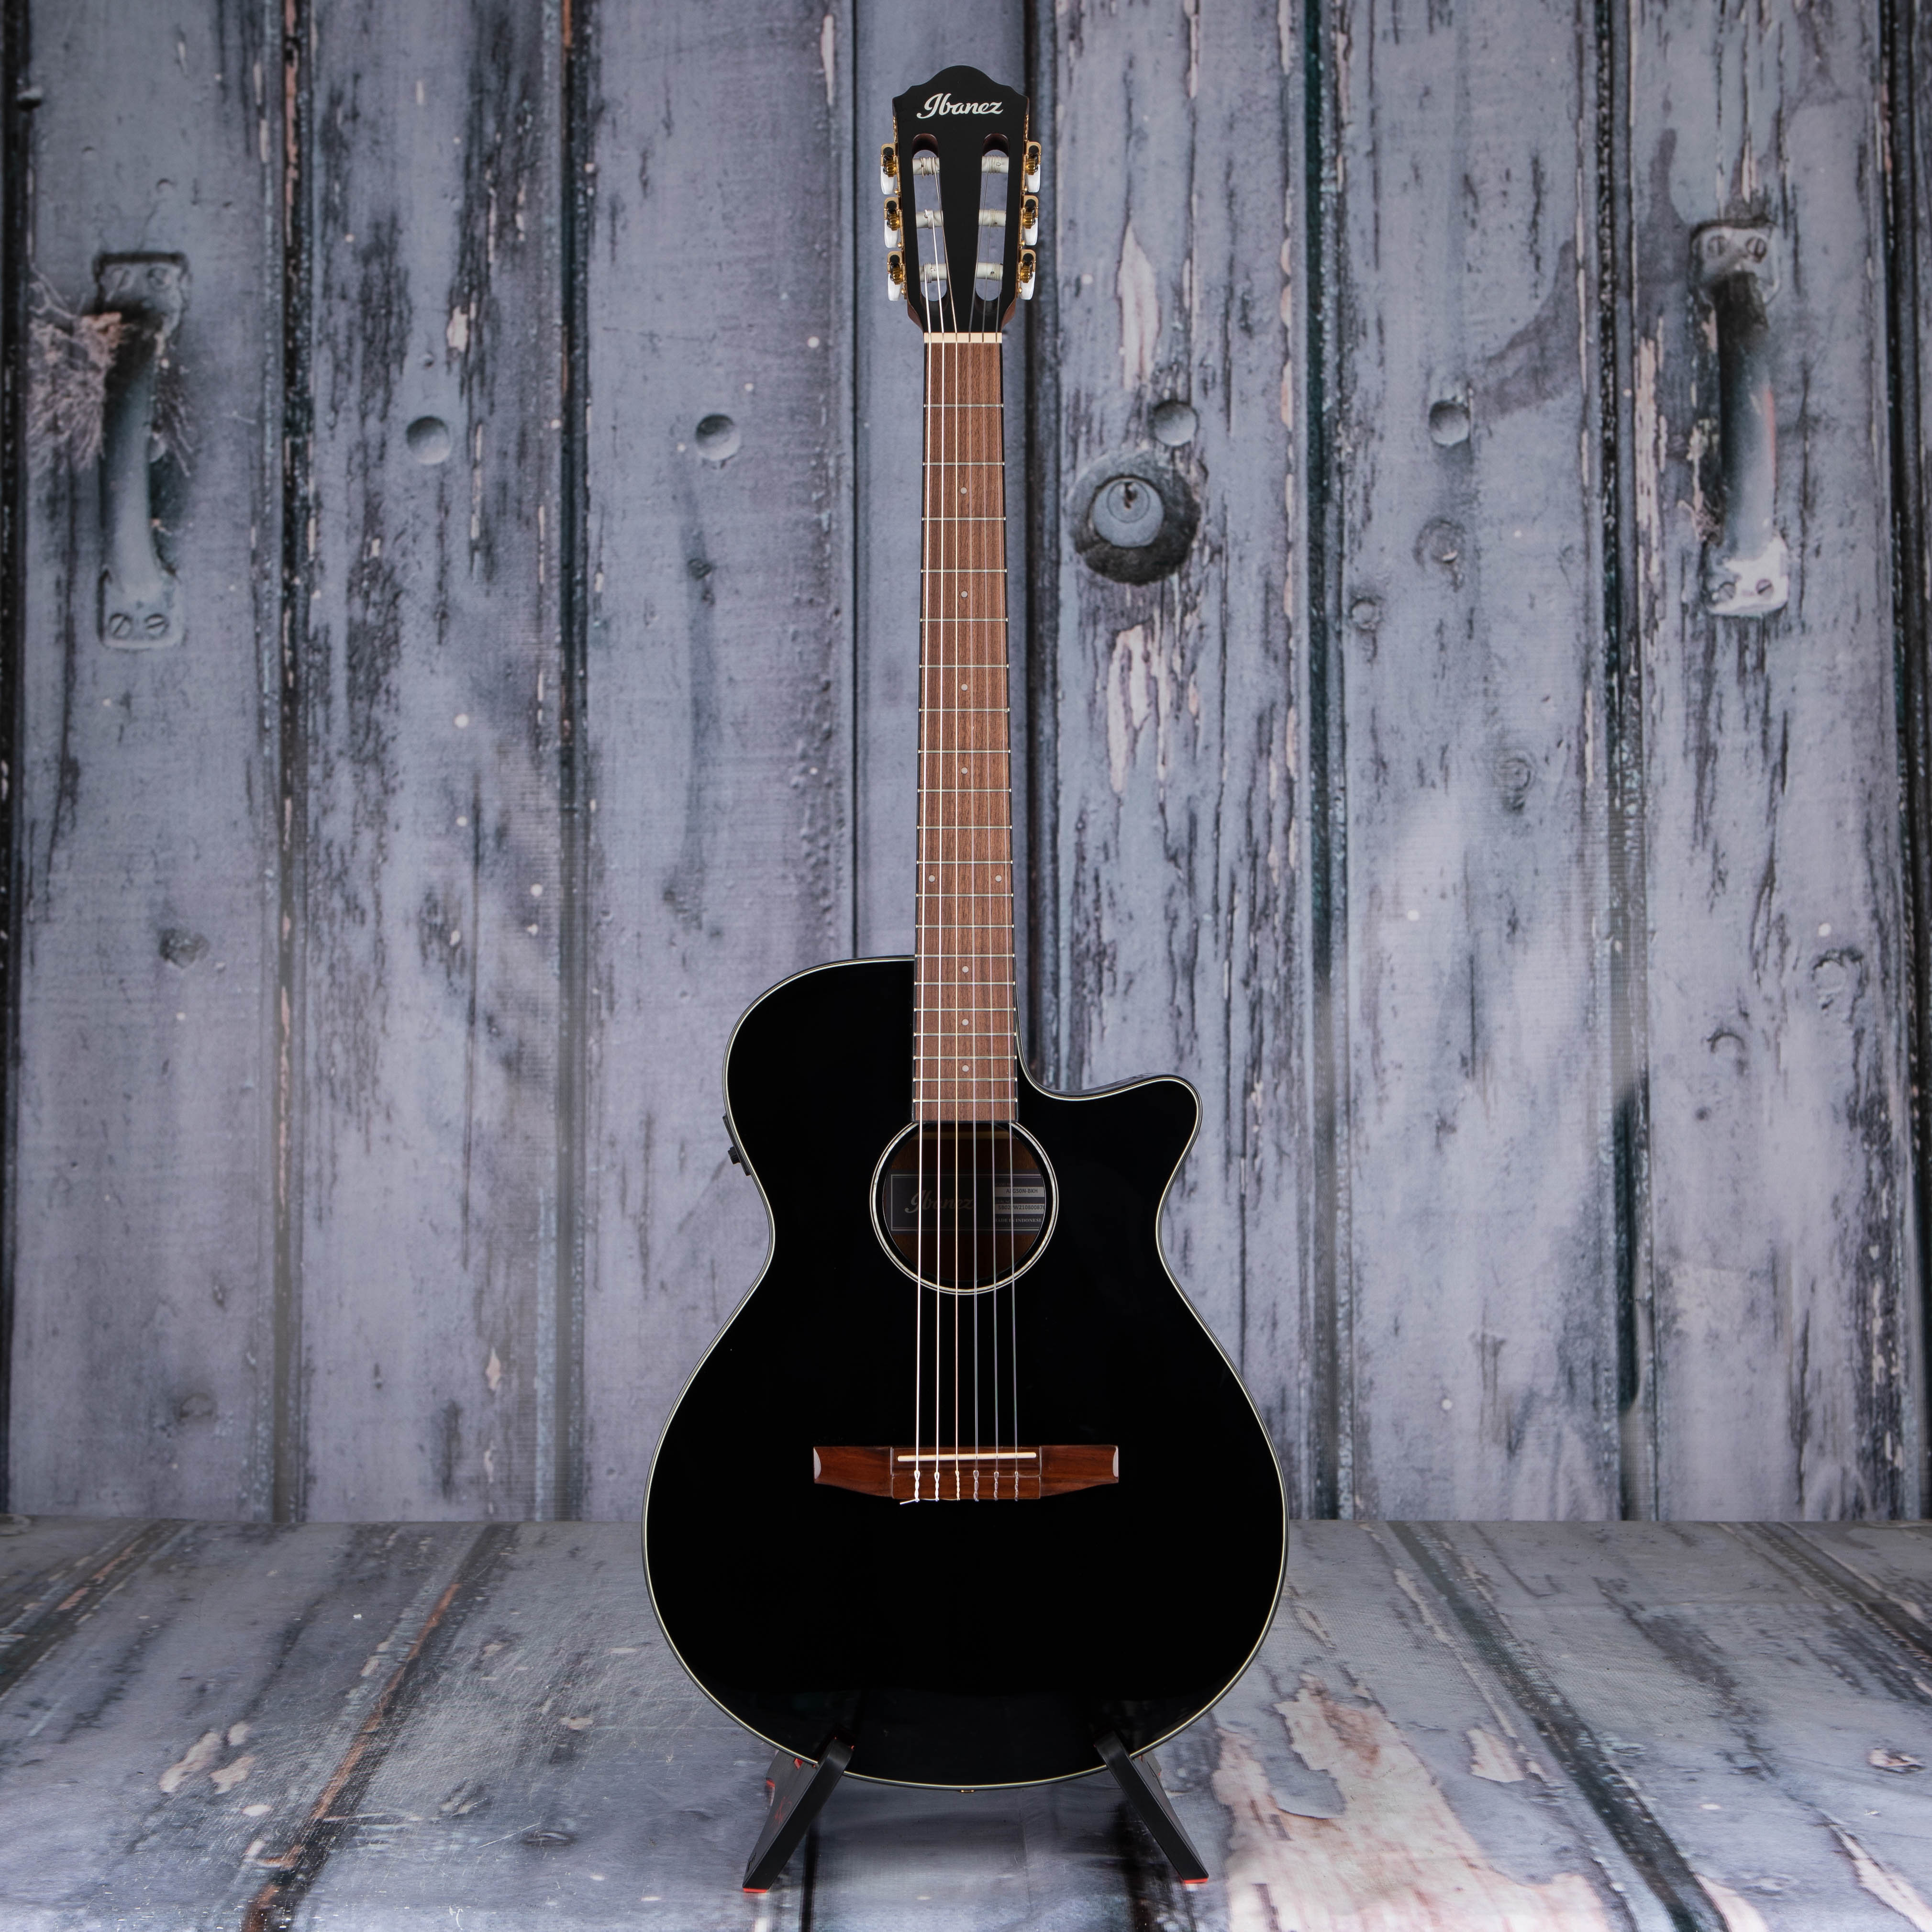 Ibanez AEG50N Classical Acoustic/Electric Guitar, Black High Gloss, front